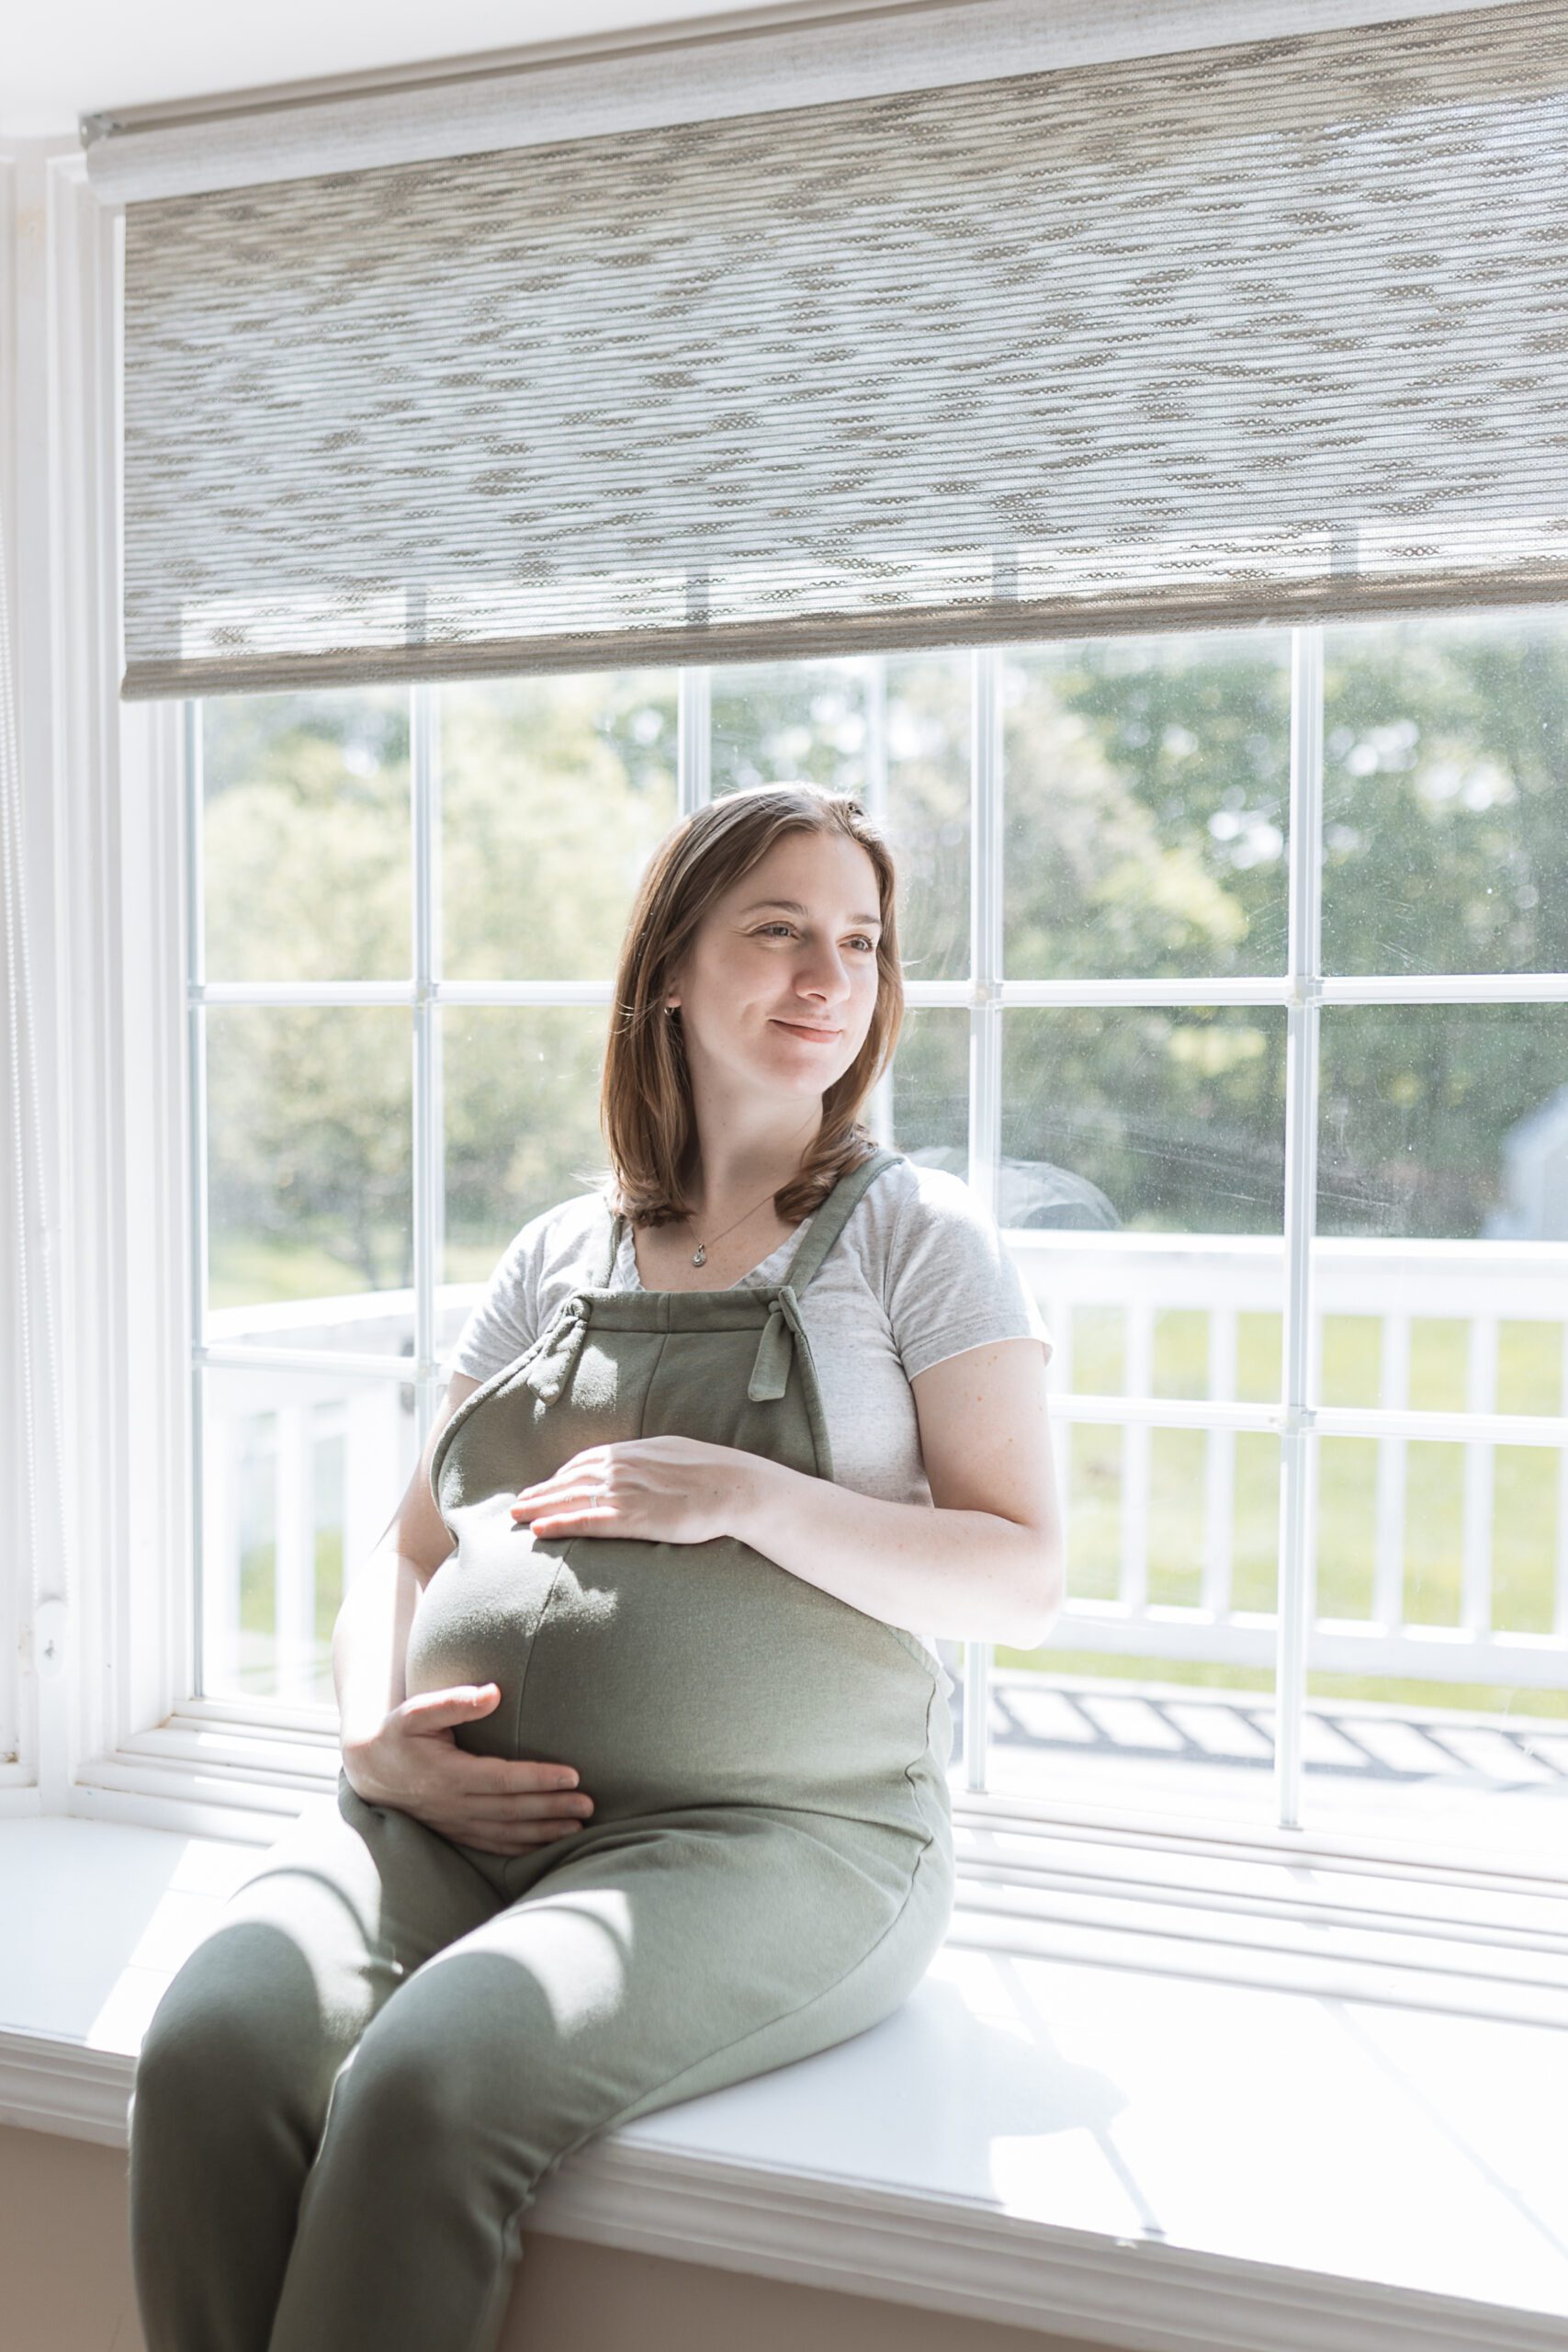 Maternity Photos at home in natural lighting